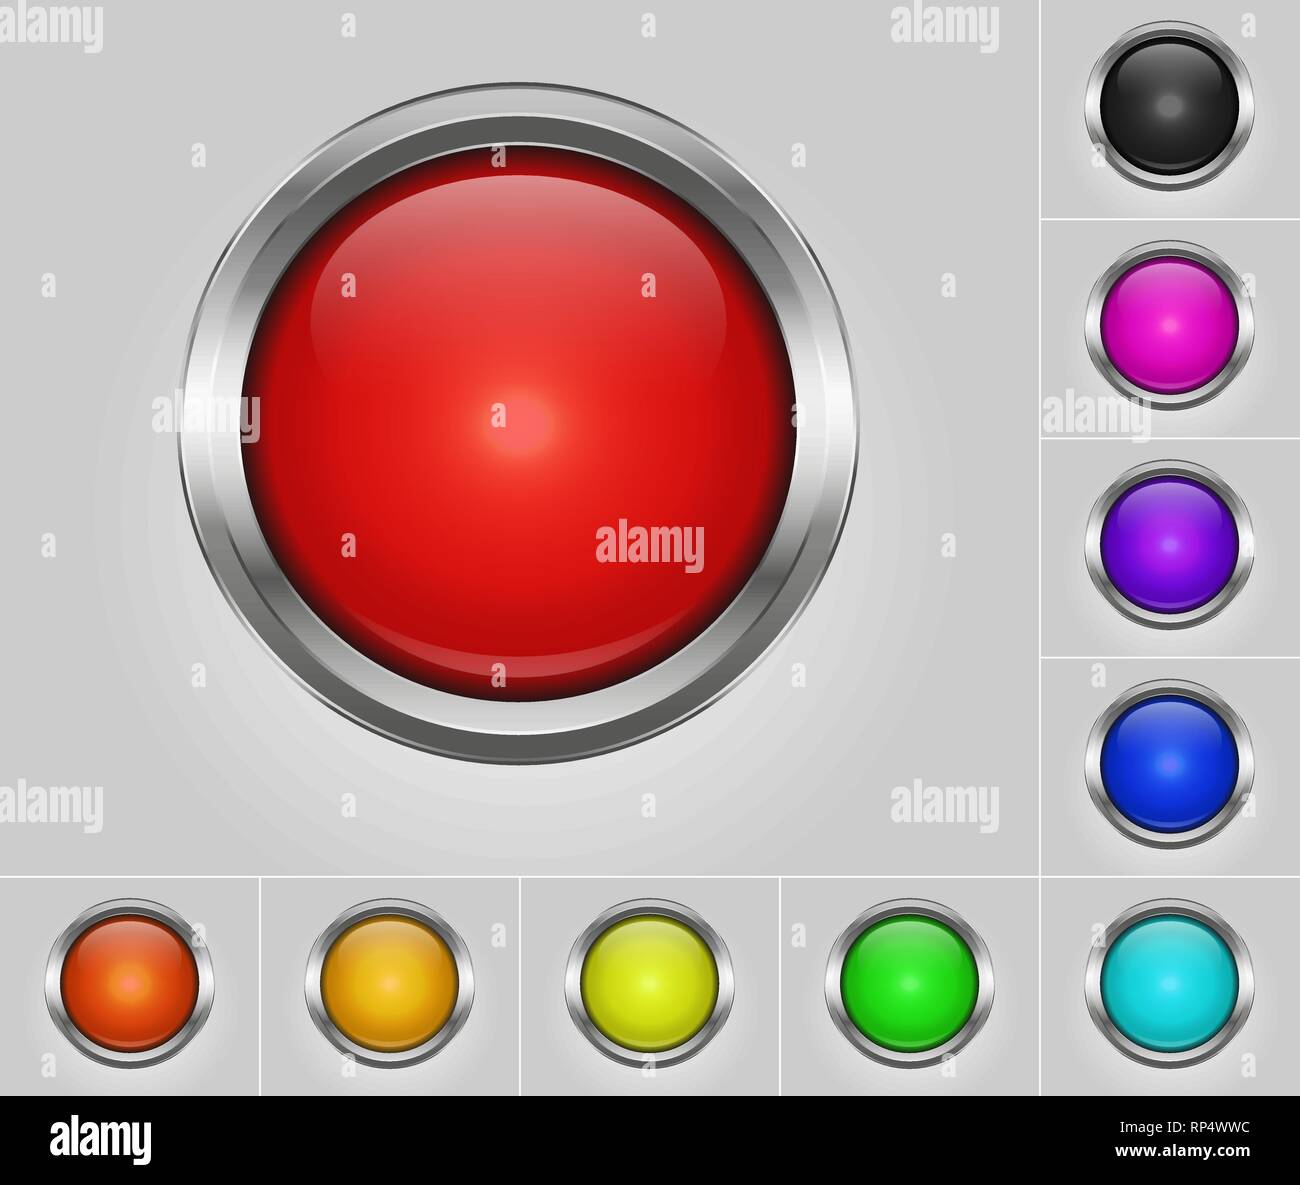 Set of round colored buttons with metallic border Stock Vector